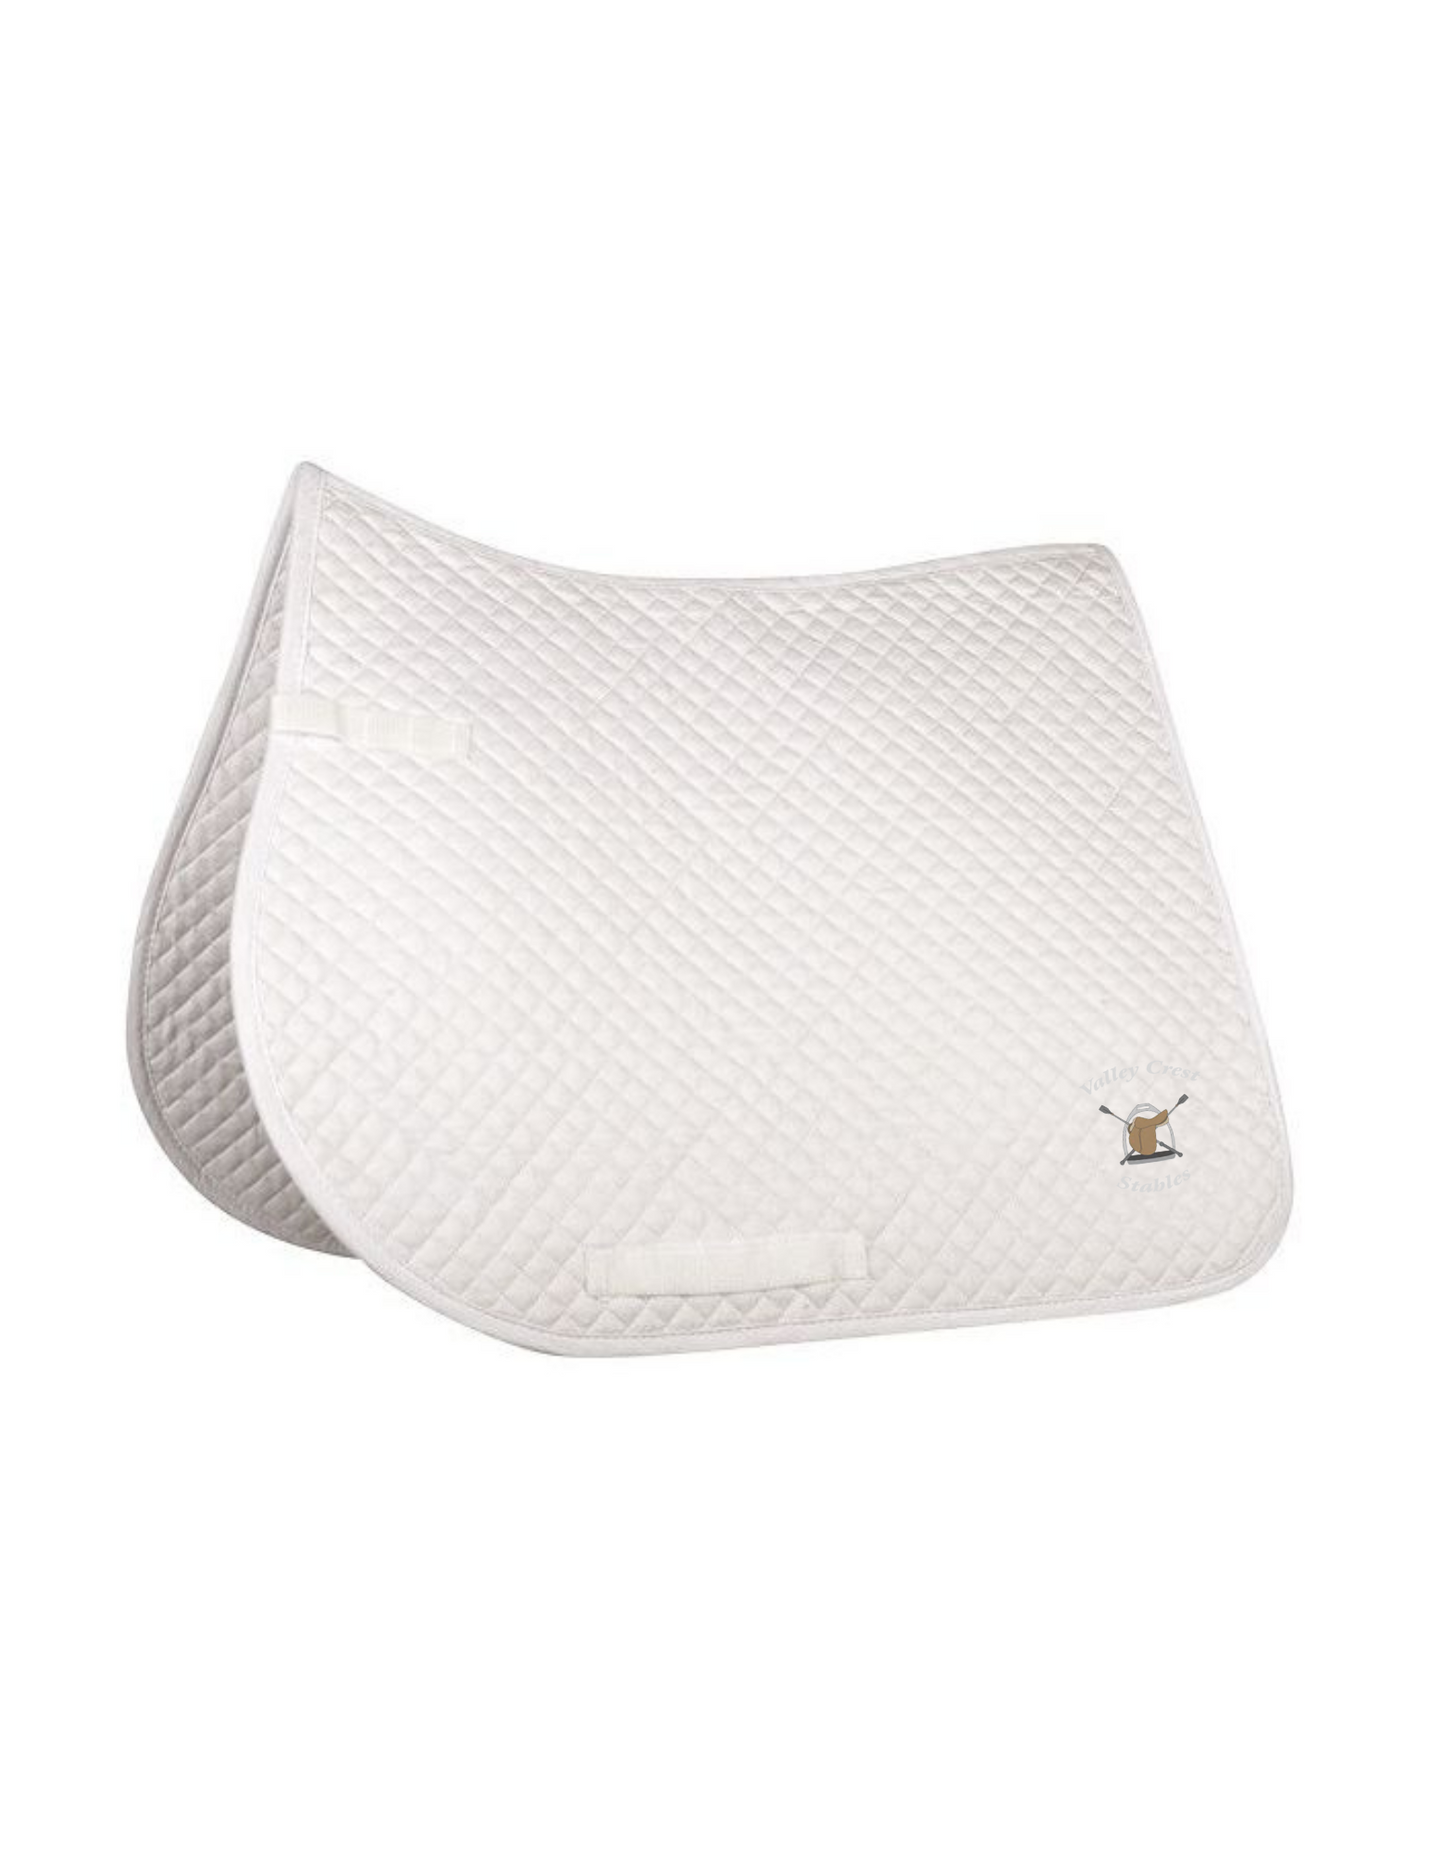 Valley Crest Stables - HKM Small Quilt General Purpose Saddle Pad